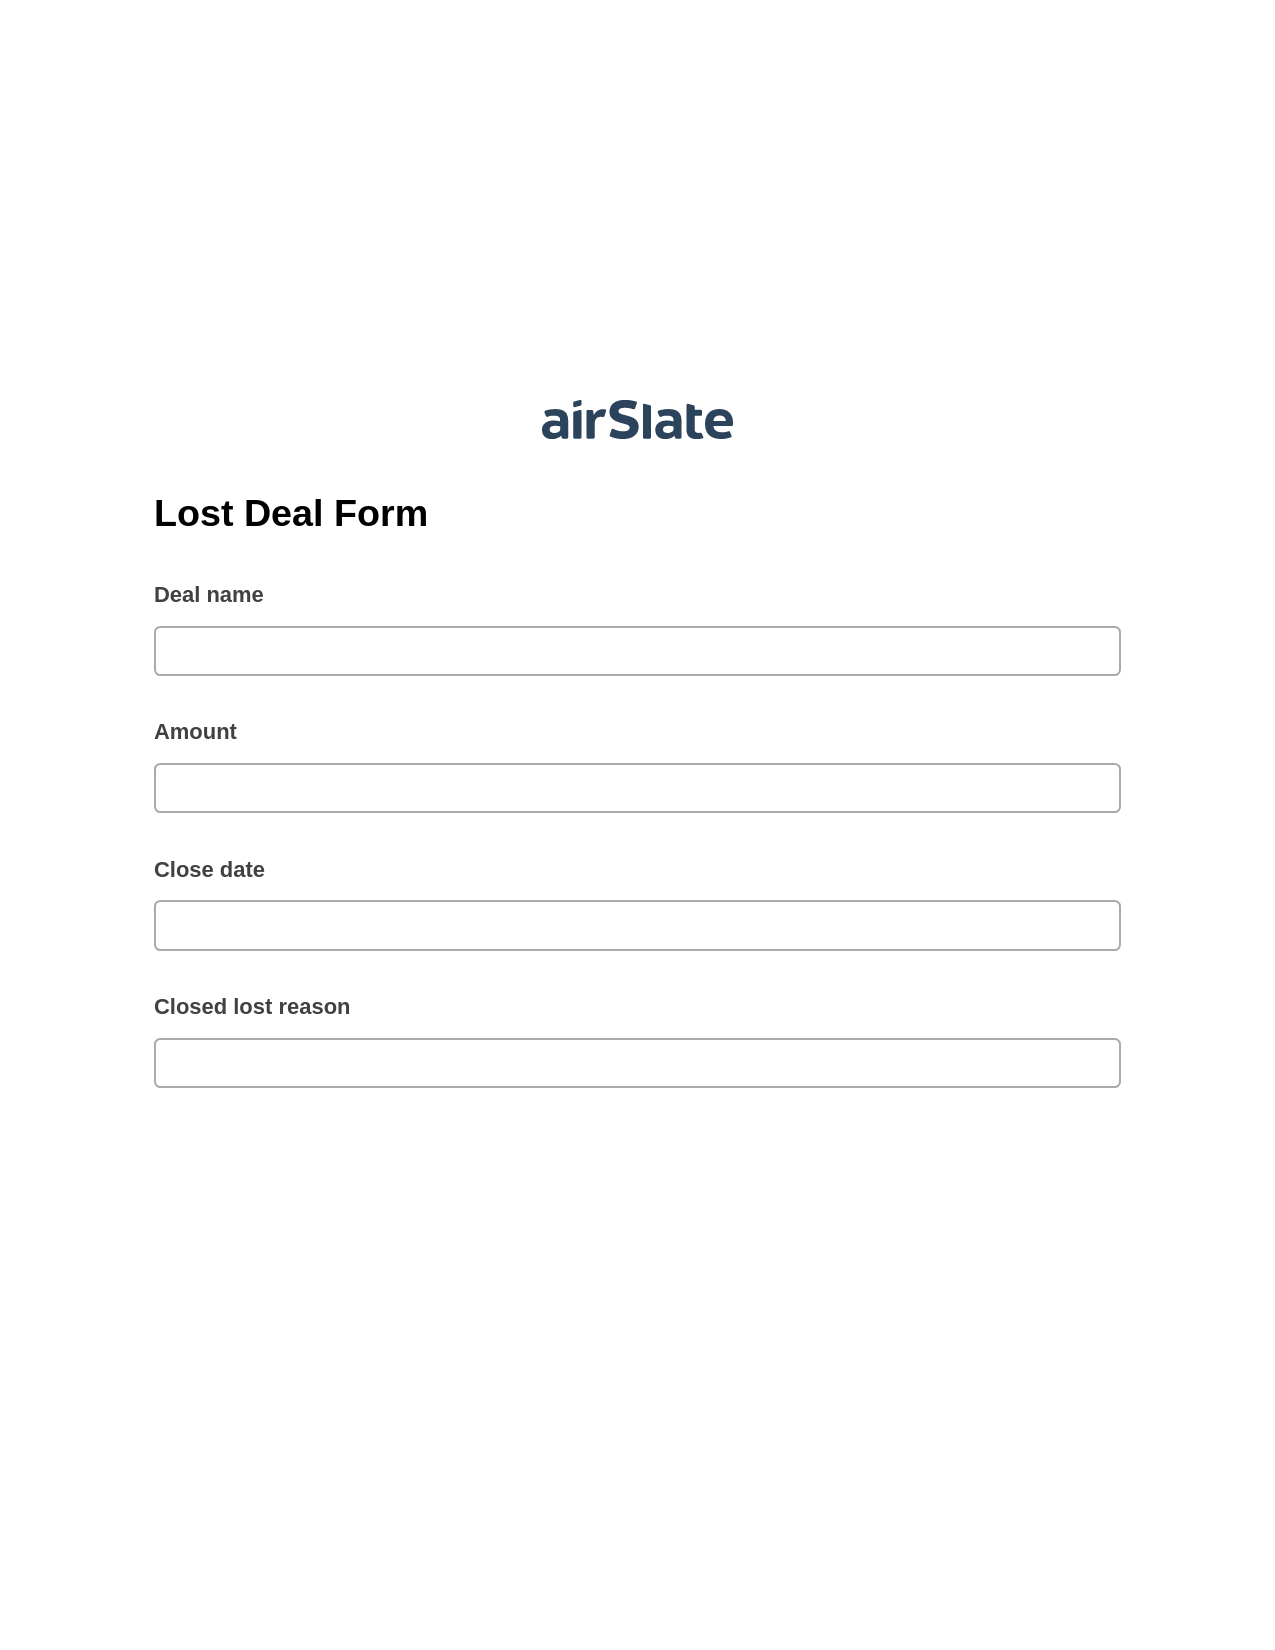 Lost Deal Form Pre-fill from Salesforce Records with SOQL Bot, Unassign Role Bot, Export to NetSuite Bot